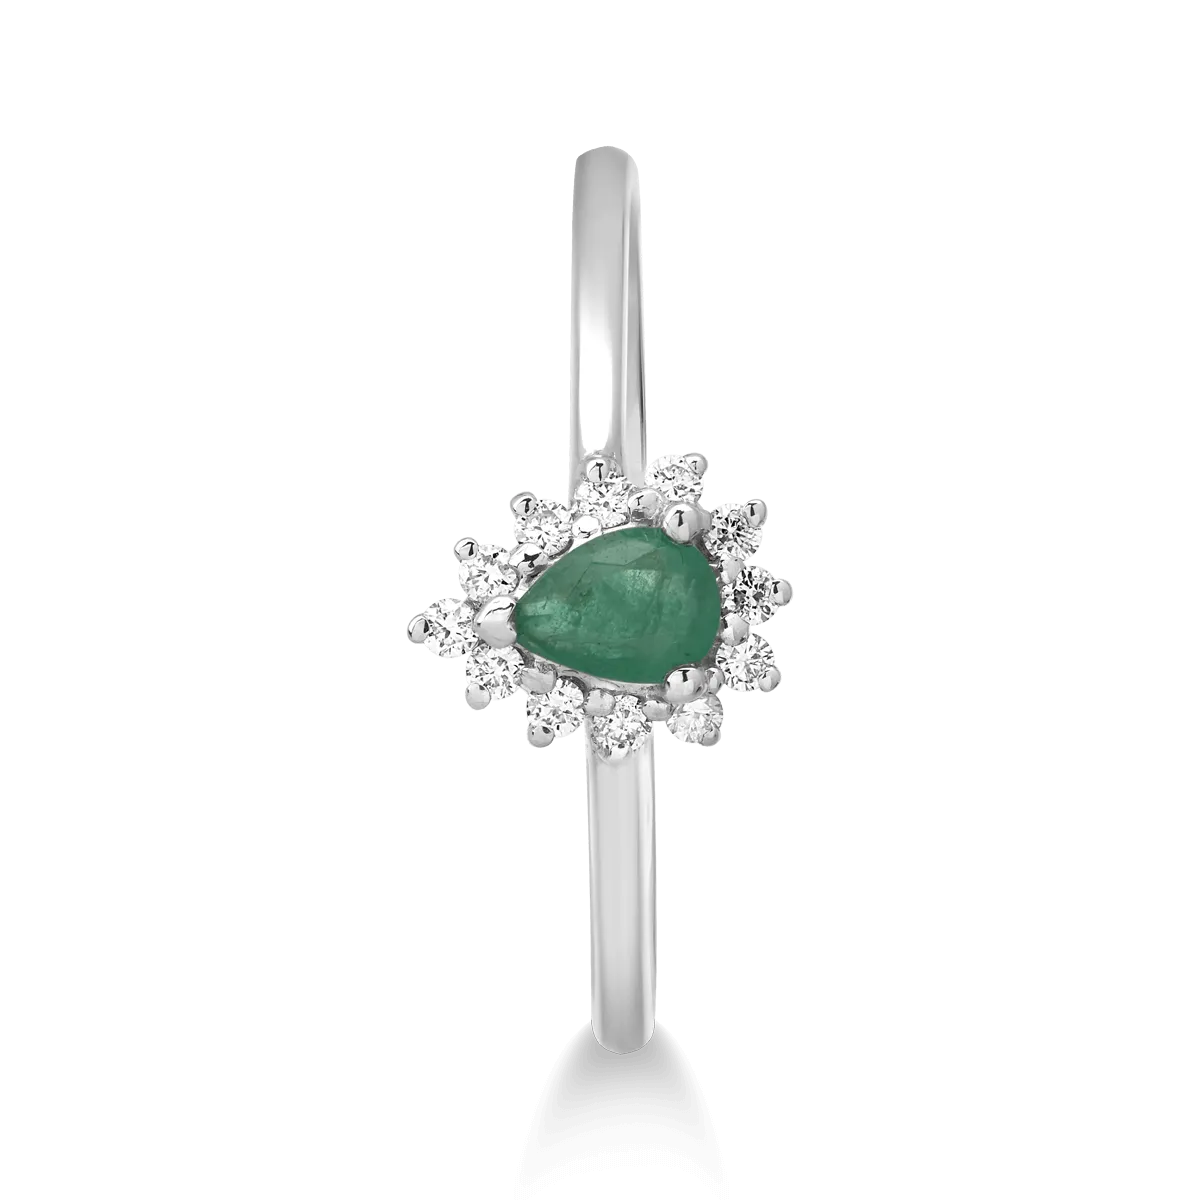 18K white gold ring with 0.144ct emerald and 0.083ct diamonds